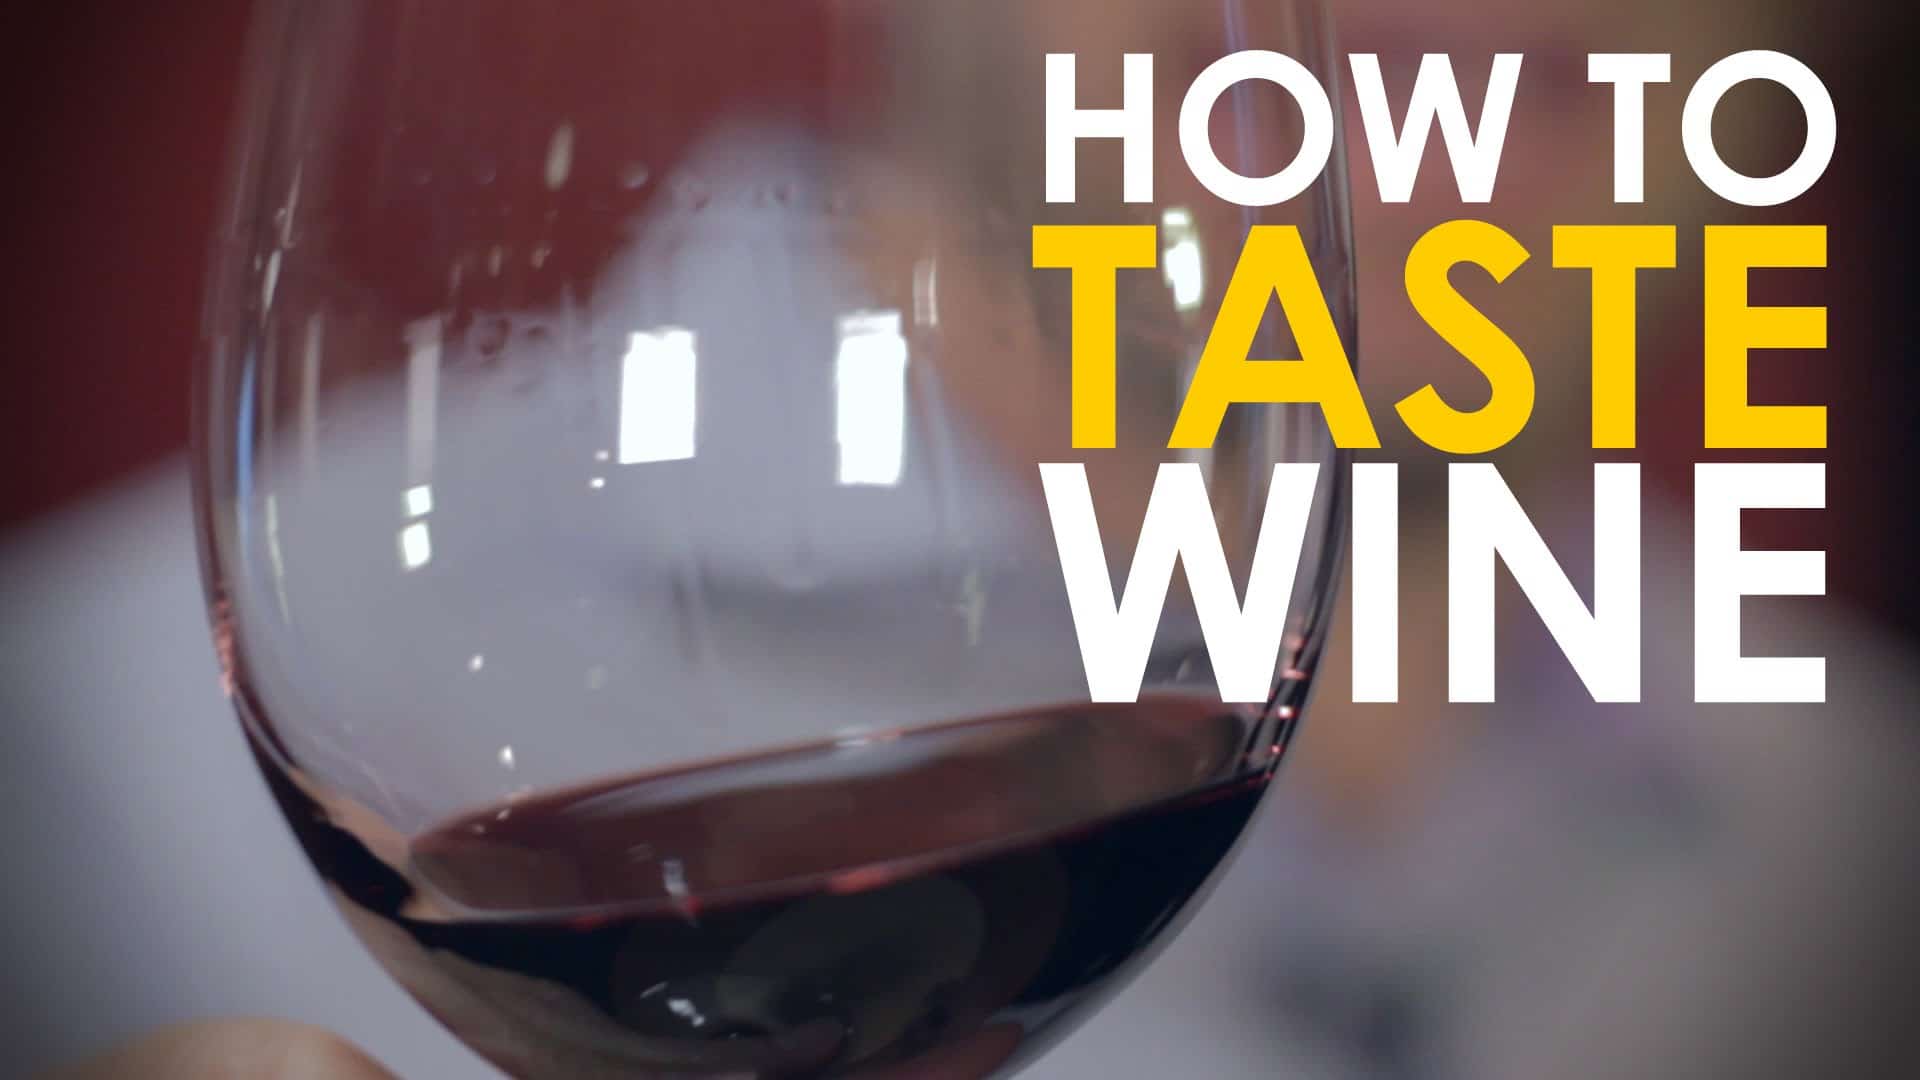 Learn how to taste wine with this helpful video guide.